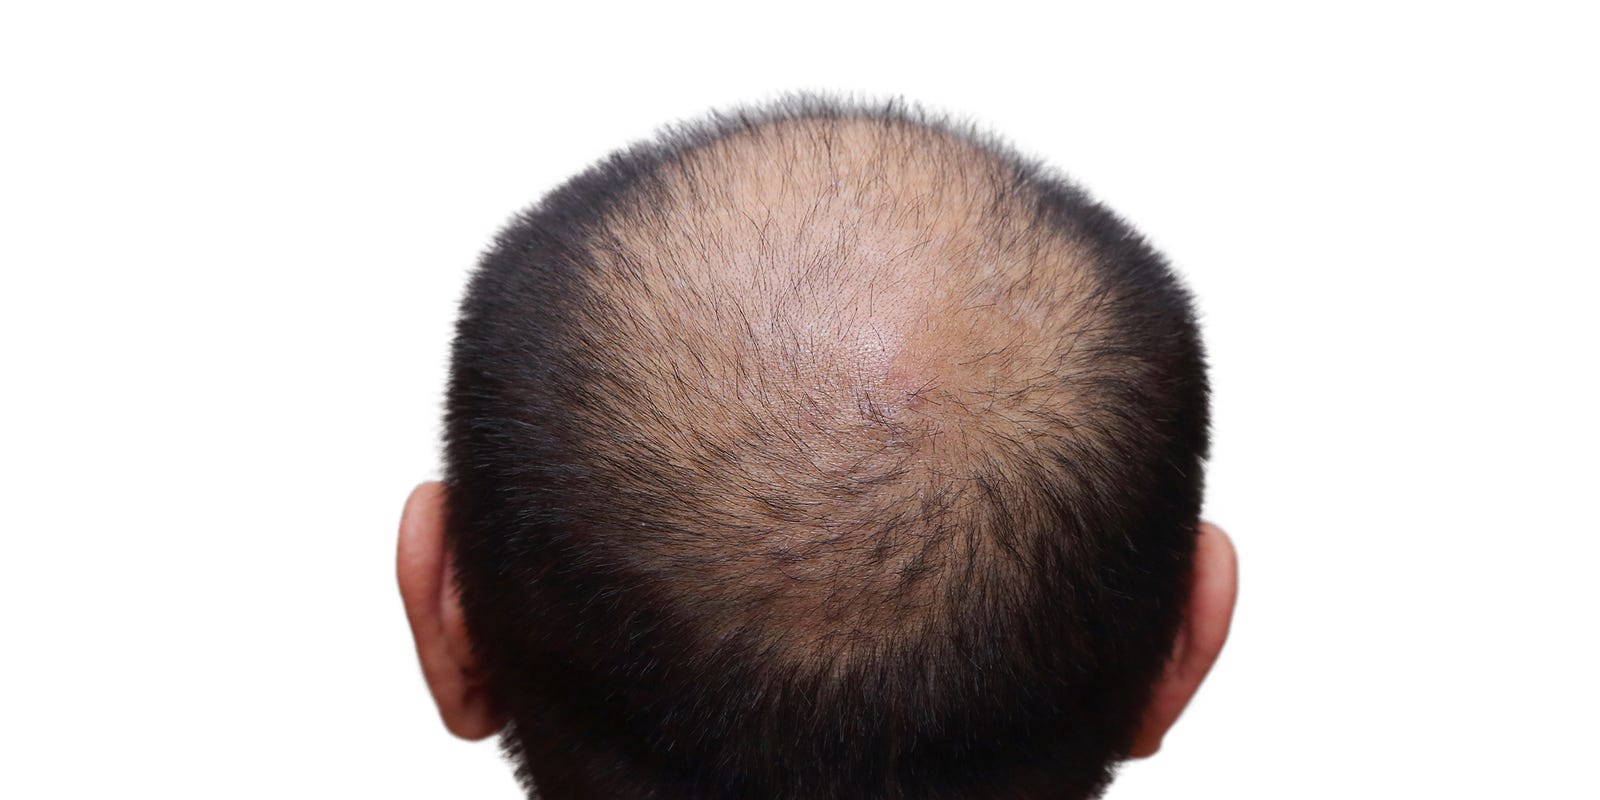 Boomer Health: New study details most effective options for male pattern baldness